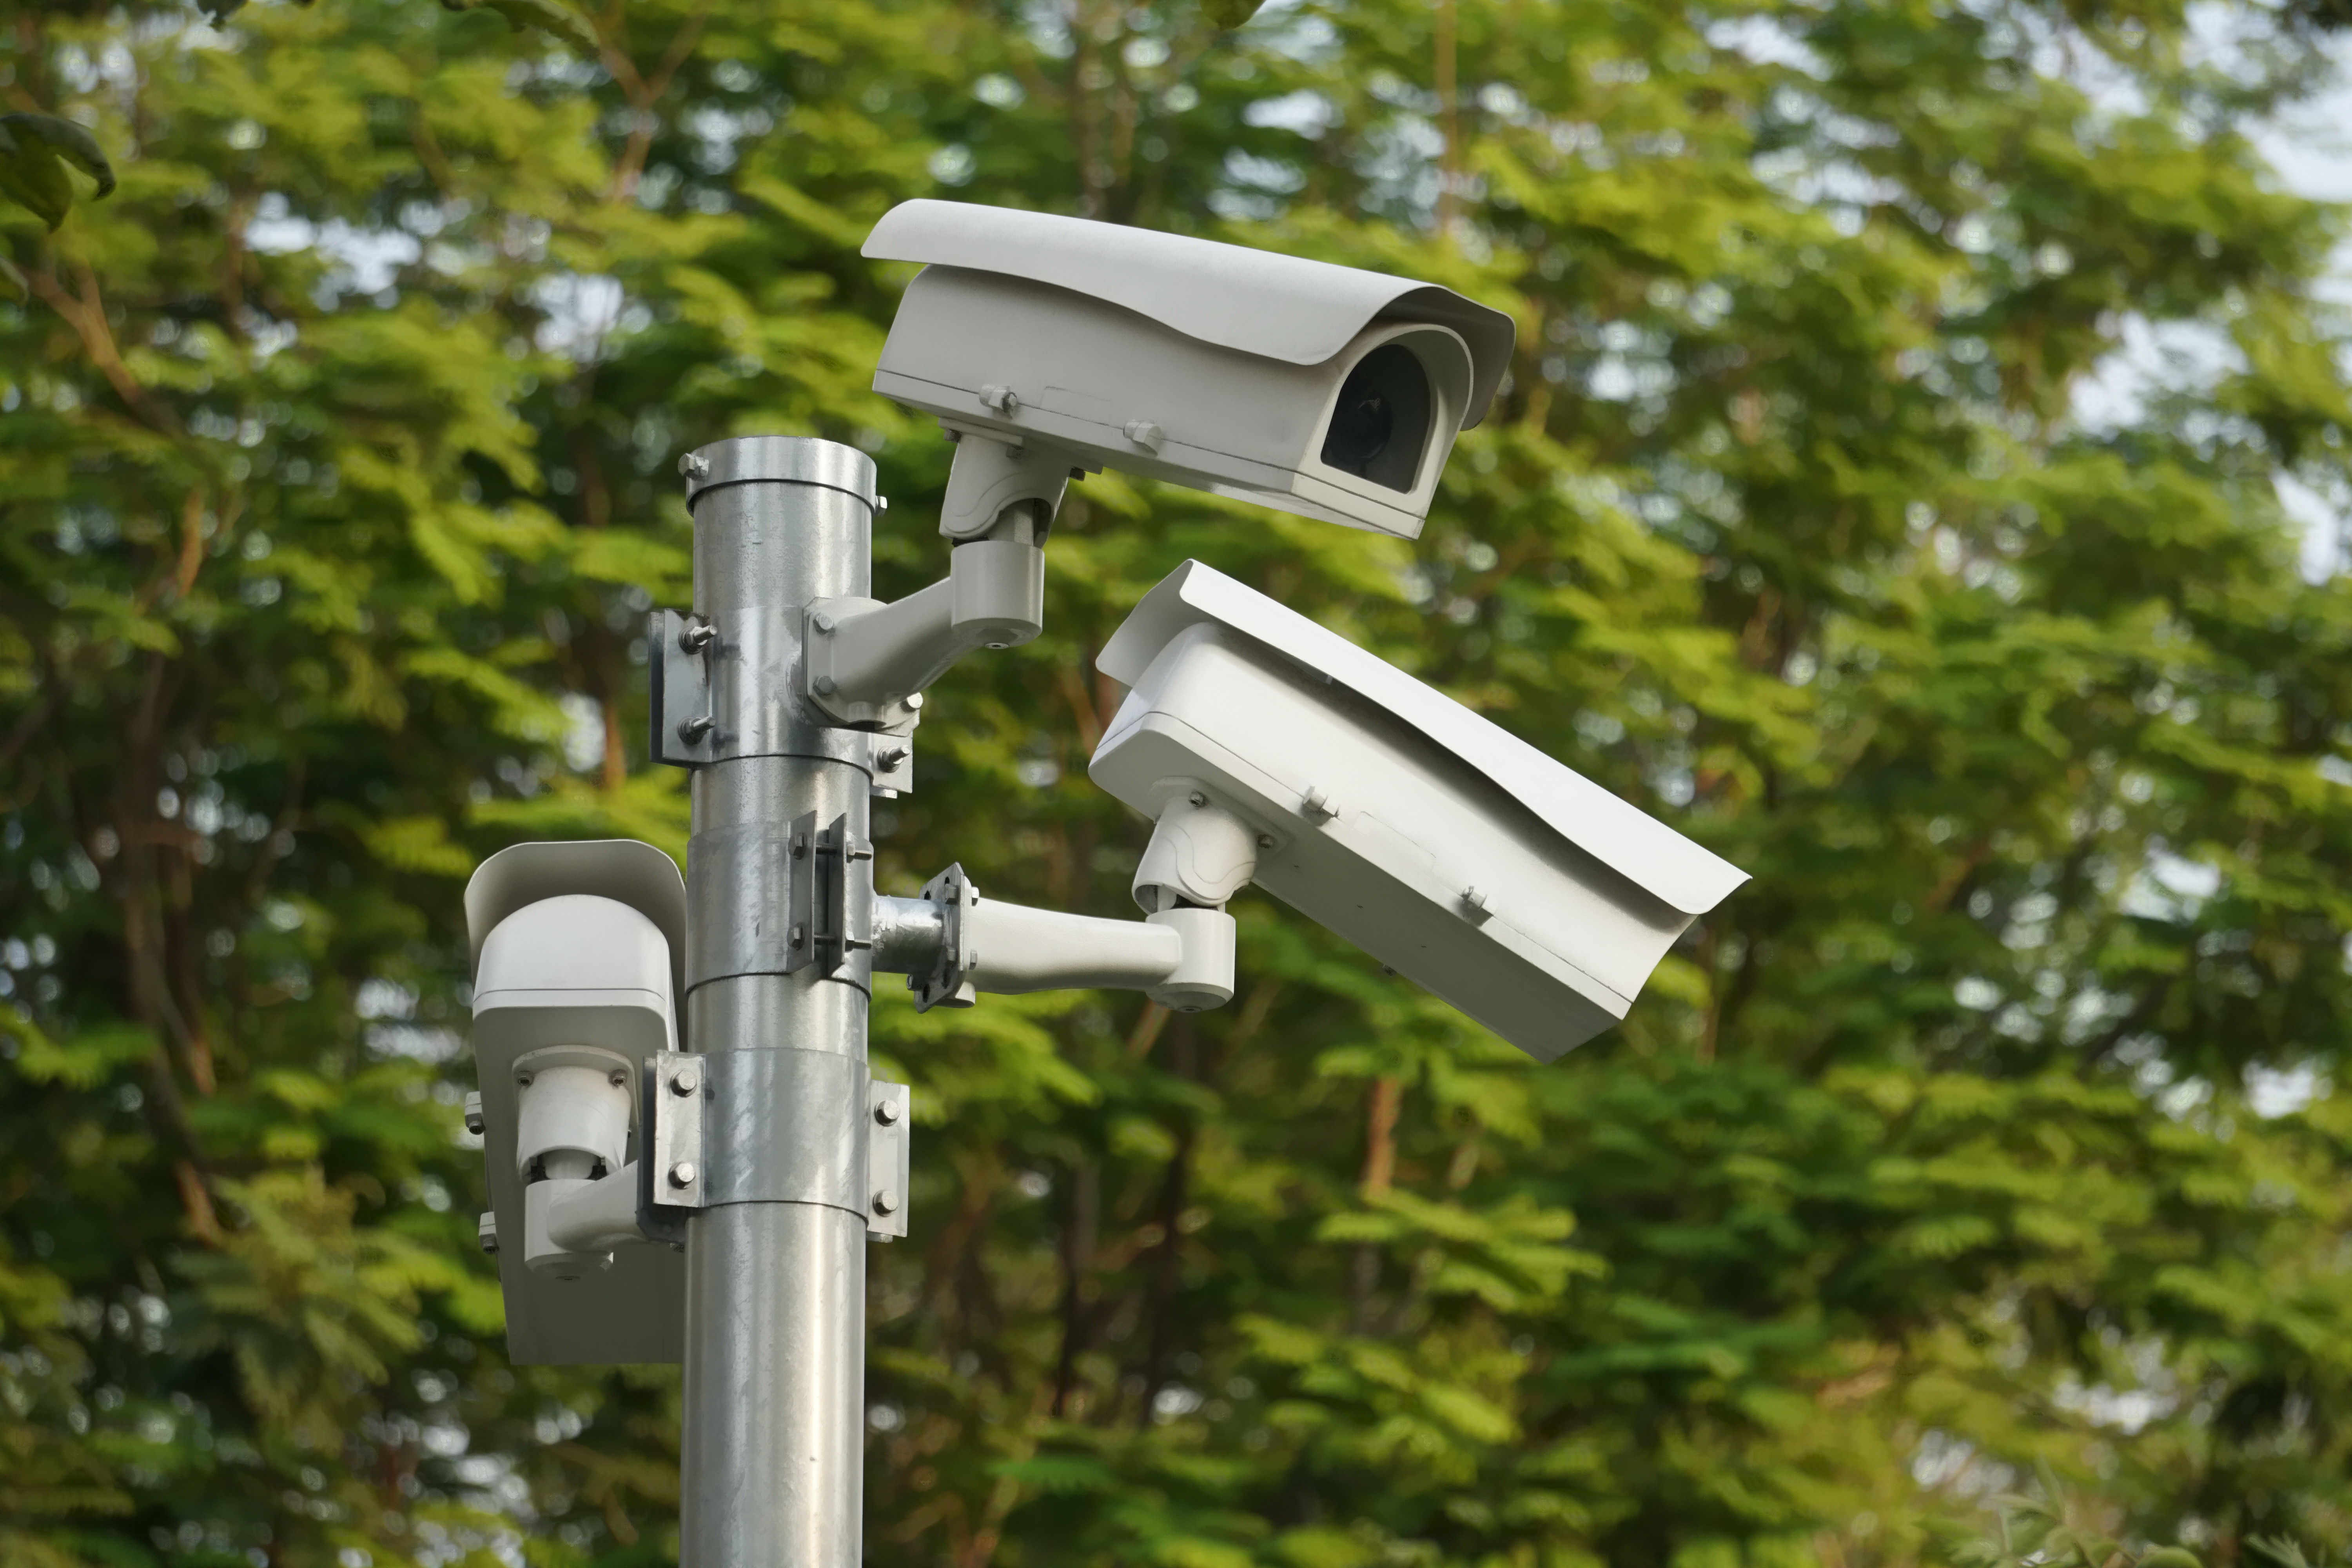 CC.TV. cameras on metal pole in public park for monitor, observe and record evident of incident for investigation and prevent criminal. | Source: Shutterstock